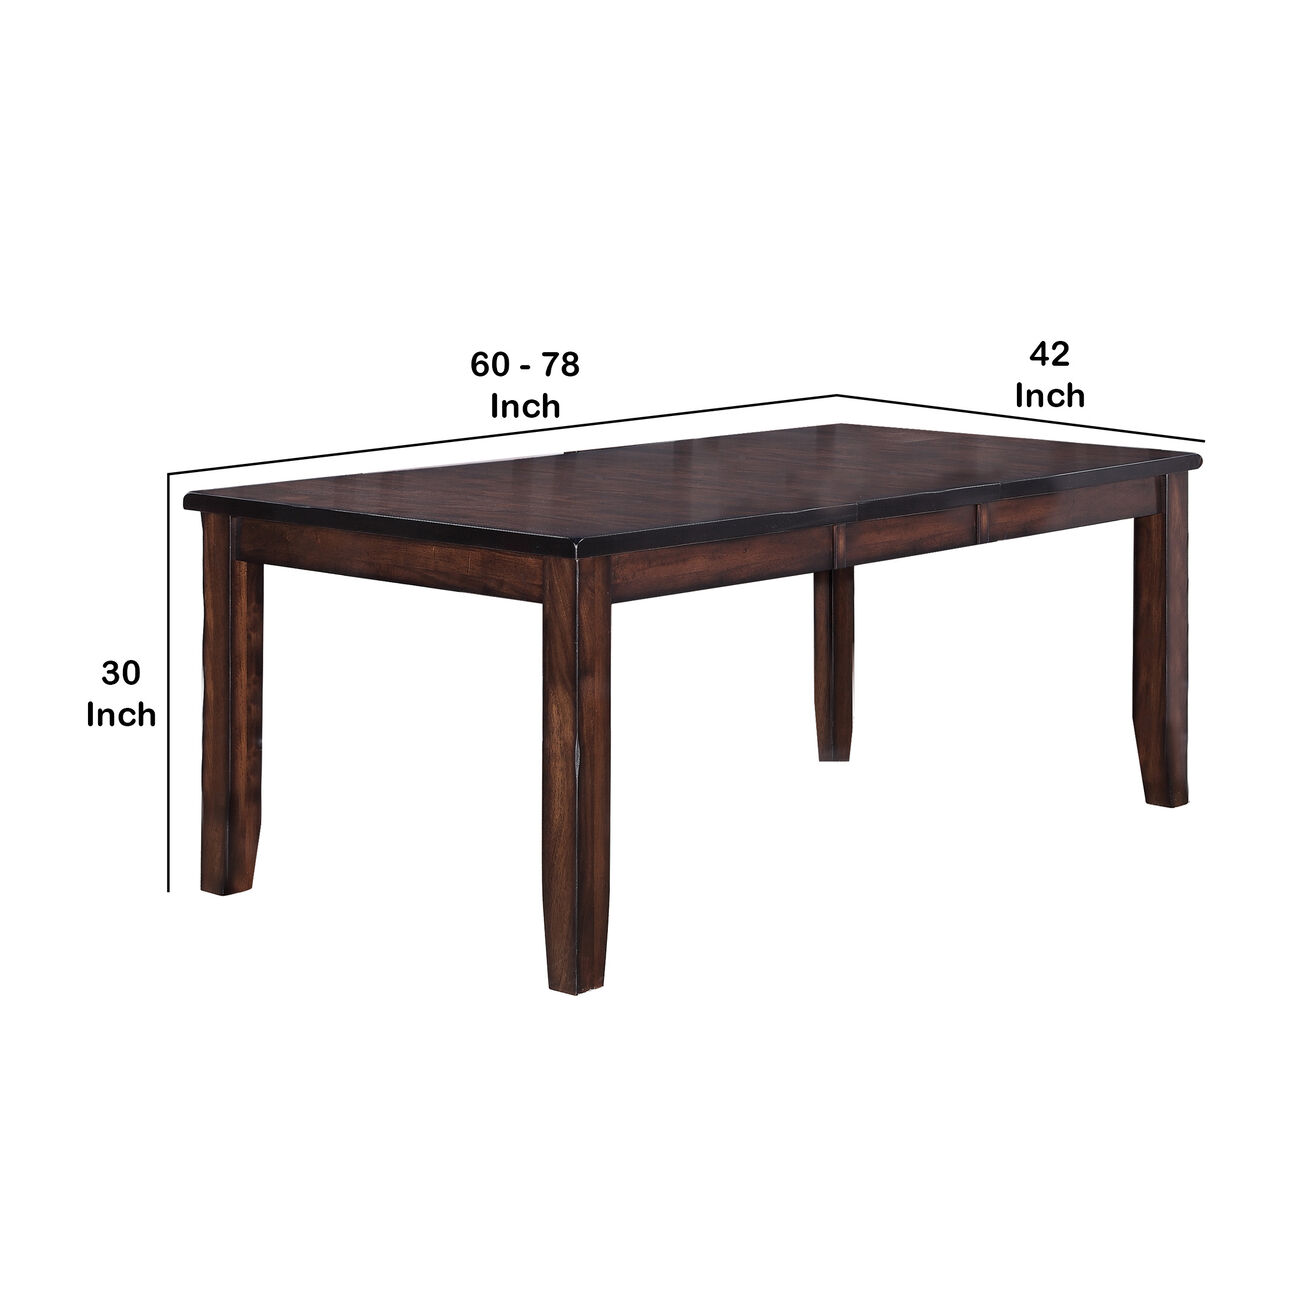 Rectangular Extendable Wooden Dining Table with Block Legs, Brown